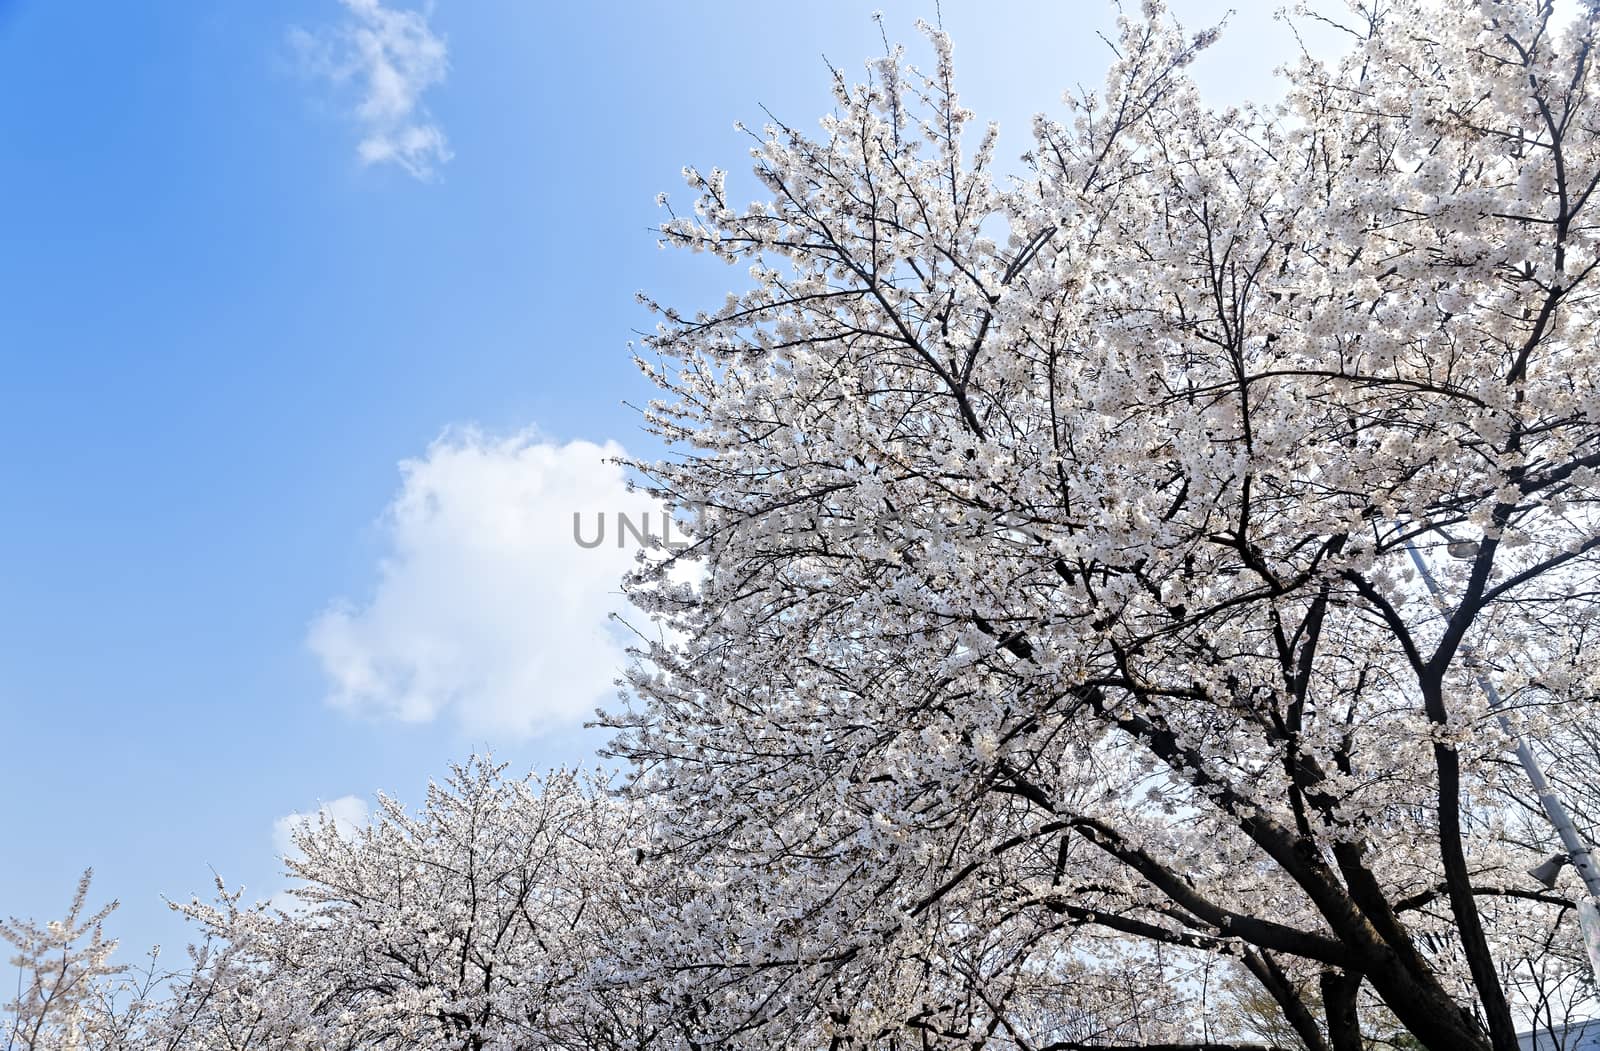 Branches of blooming apple tree with many flowers over blue sky